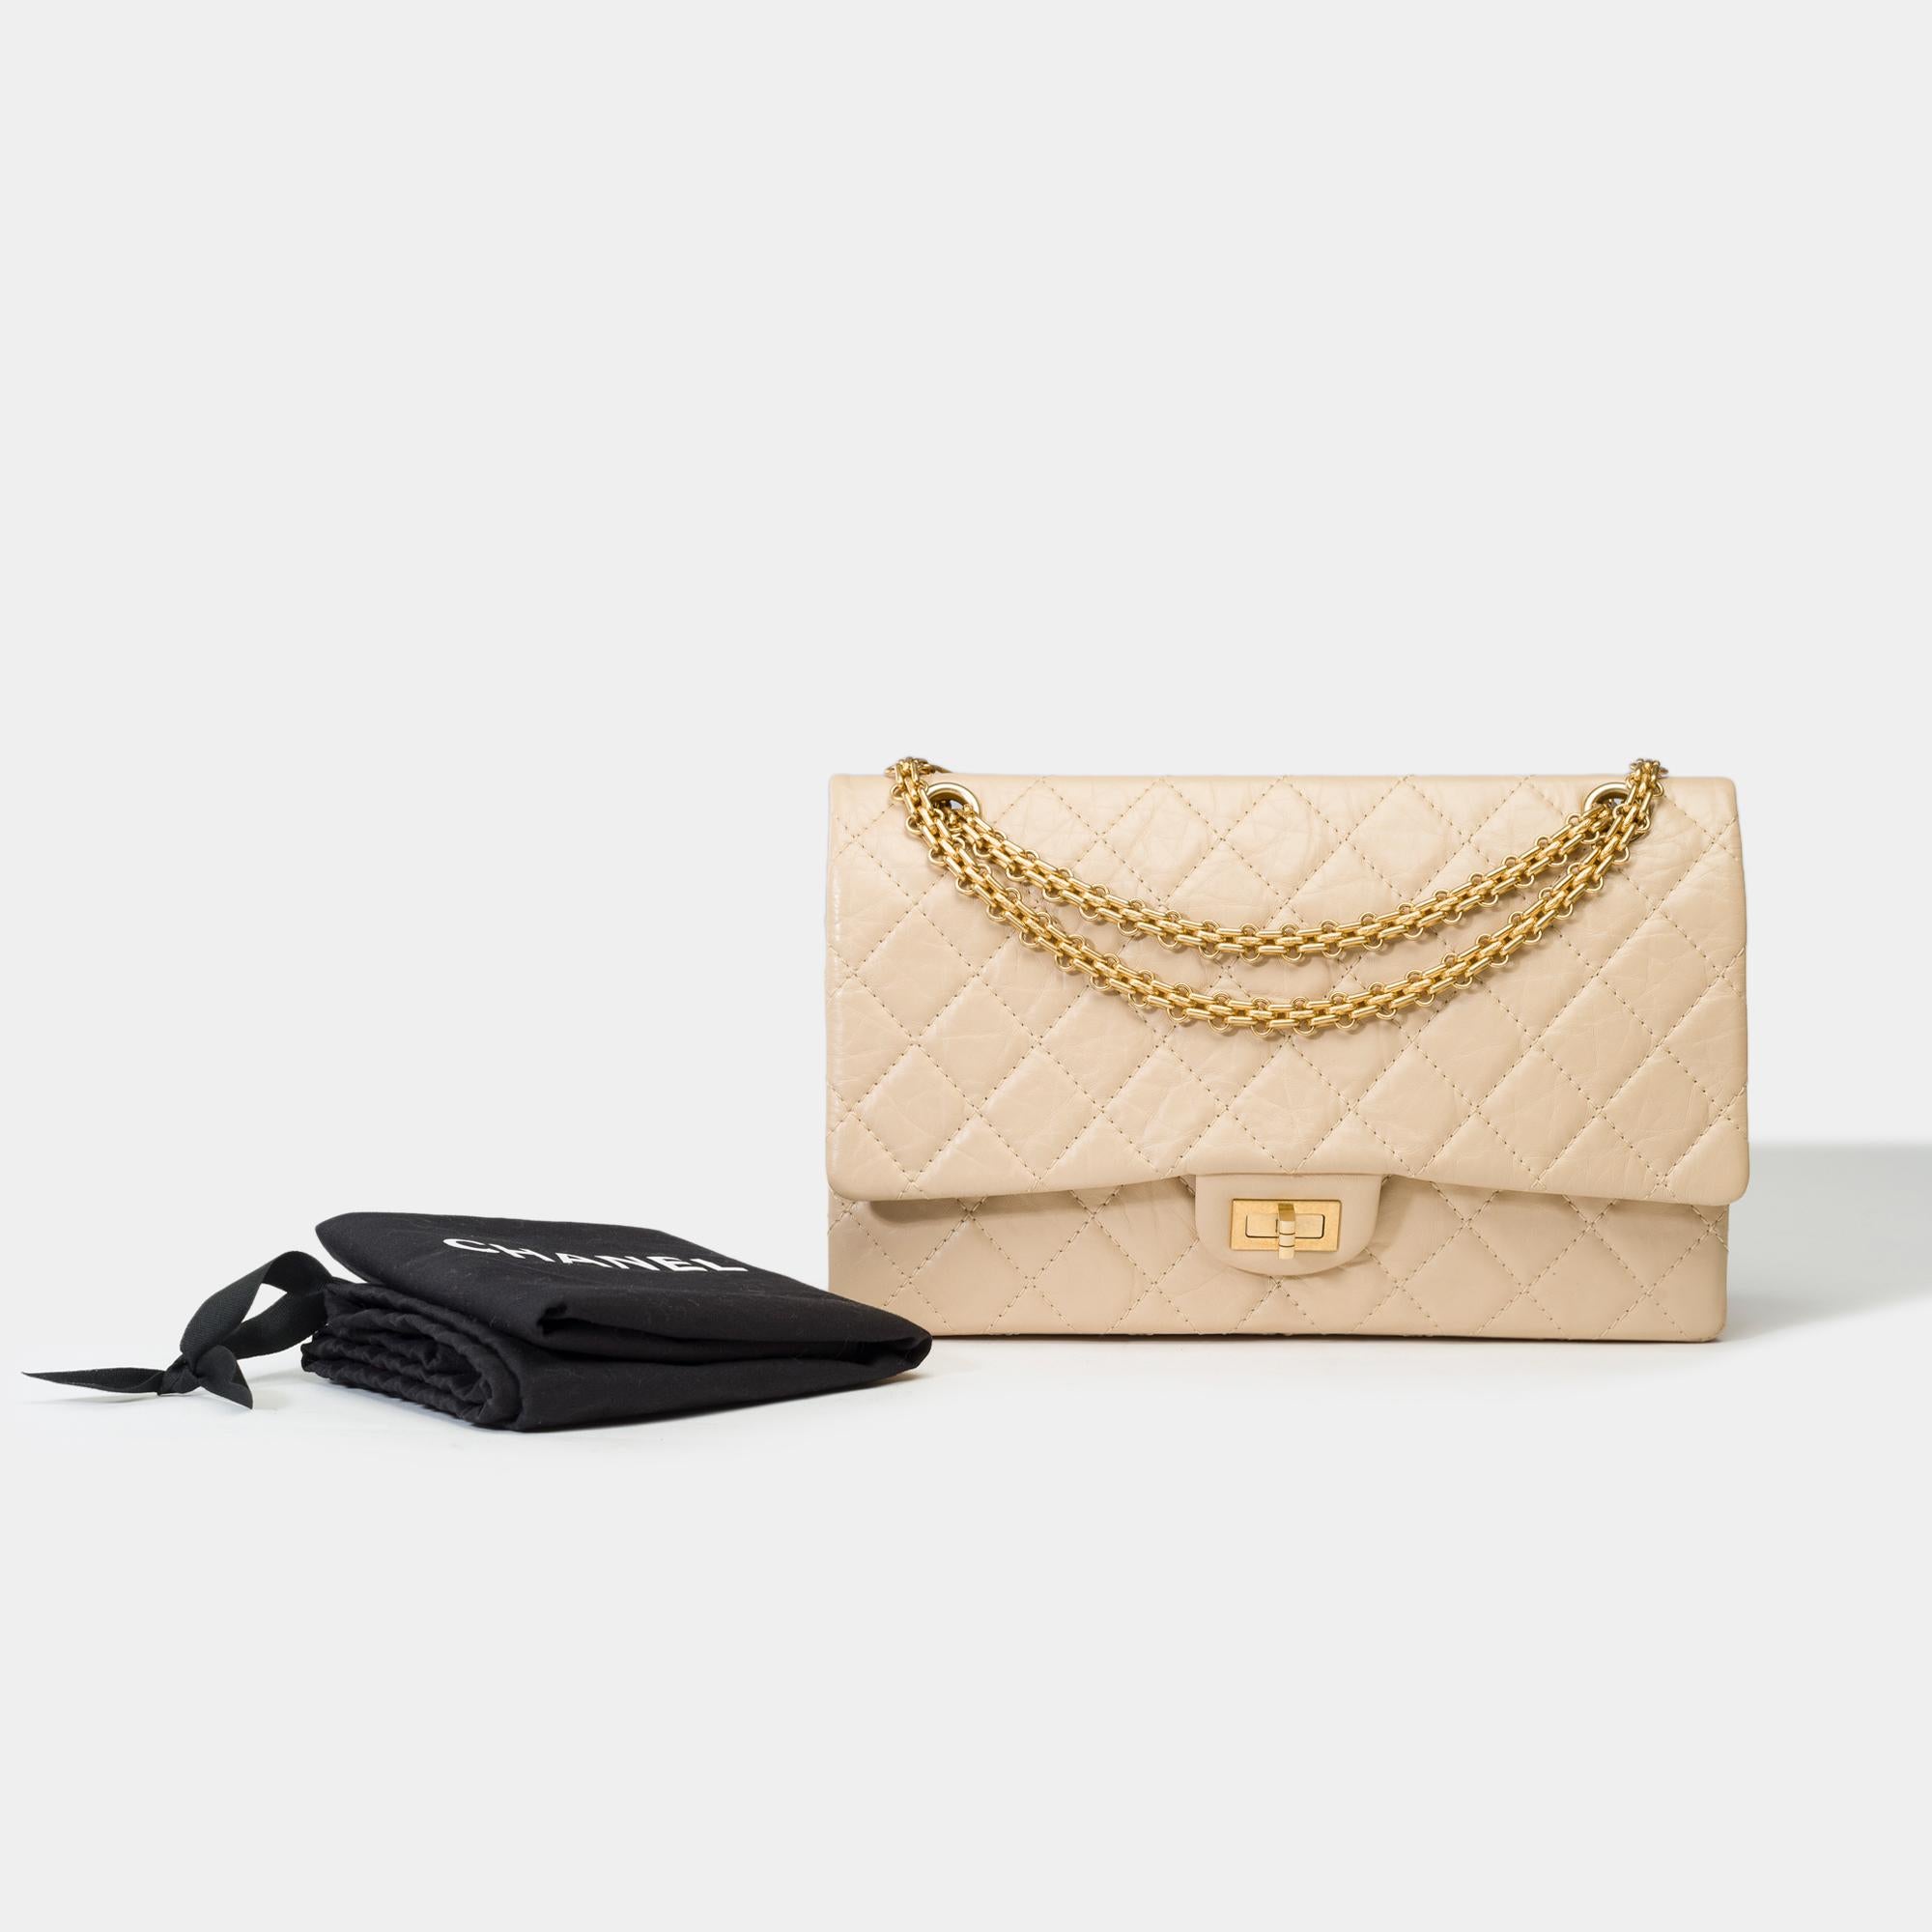 Iconic​ ​Chanel​ ​2.55​ ​shoulder​ ​bag​ ​in​ ​quilted​ ​beige​ ​leather​ ​with​ ​pattern,​ ​gold​ ​metal​ ​trim,​ ​a​ ​chain​ ​handle​ ​convertible​ ​in​ ​gold​ ​metal​ ​allowing​ ​a​ ​hand​ ​or​ ​shoulder​ ​or​ ​crossbody​ ​carry

Mademoiselle​